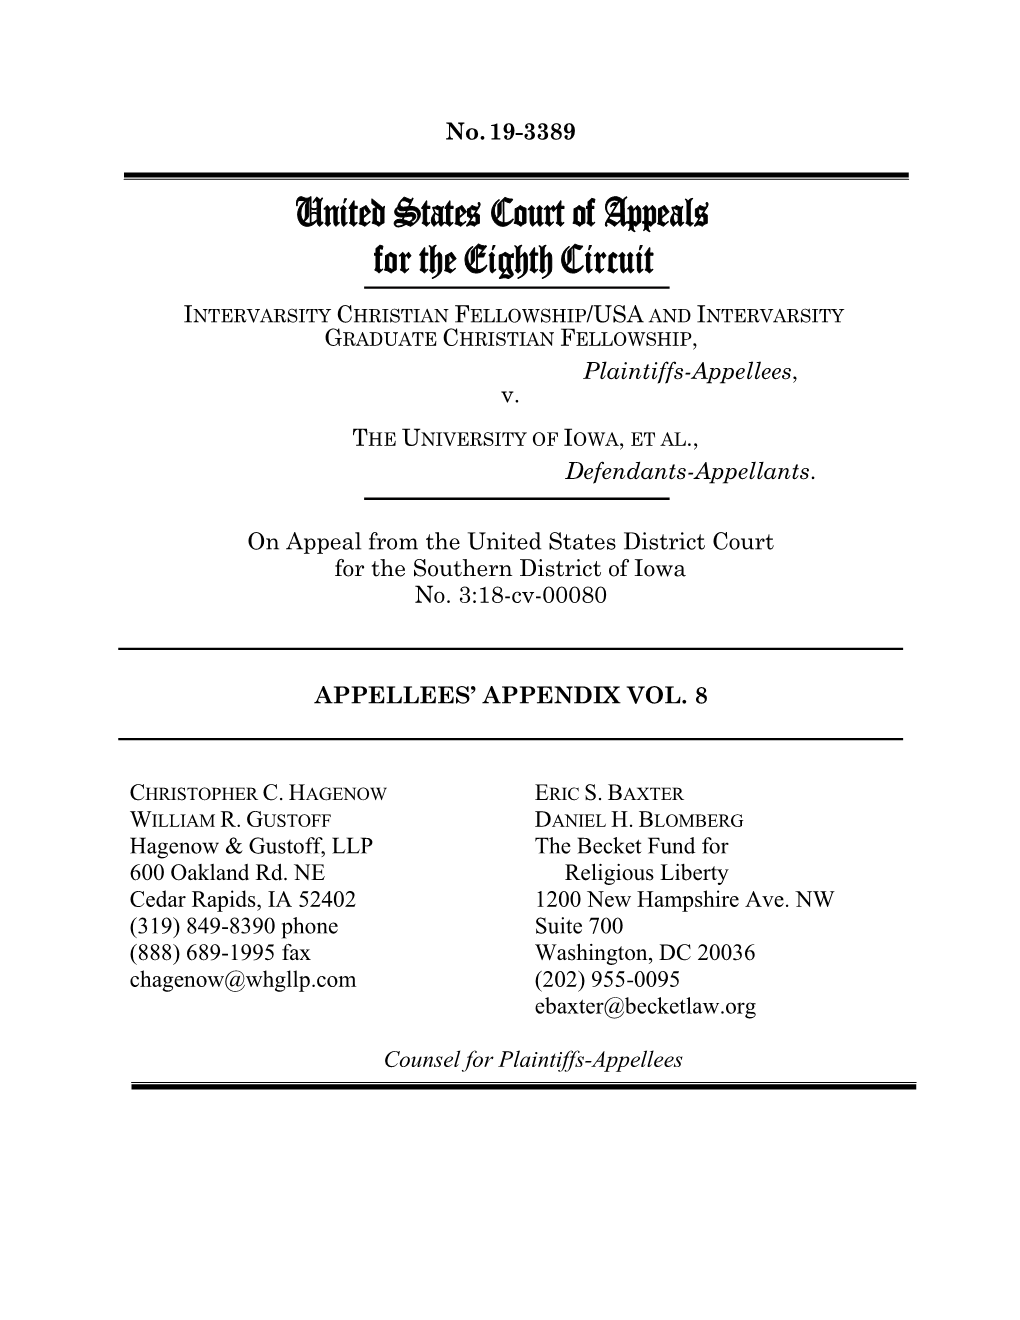 United States Court of Appeals for the Eighth Circuit